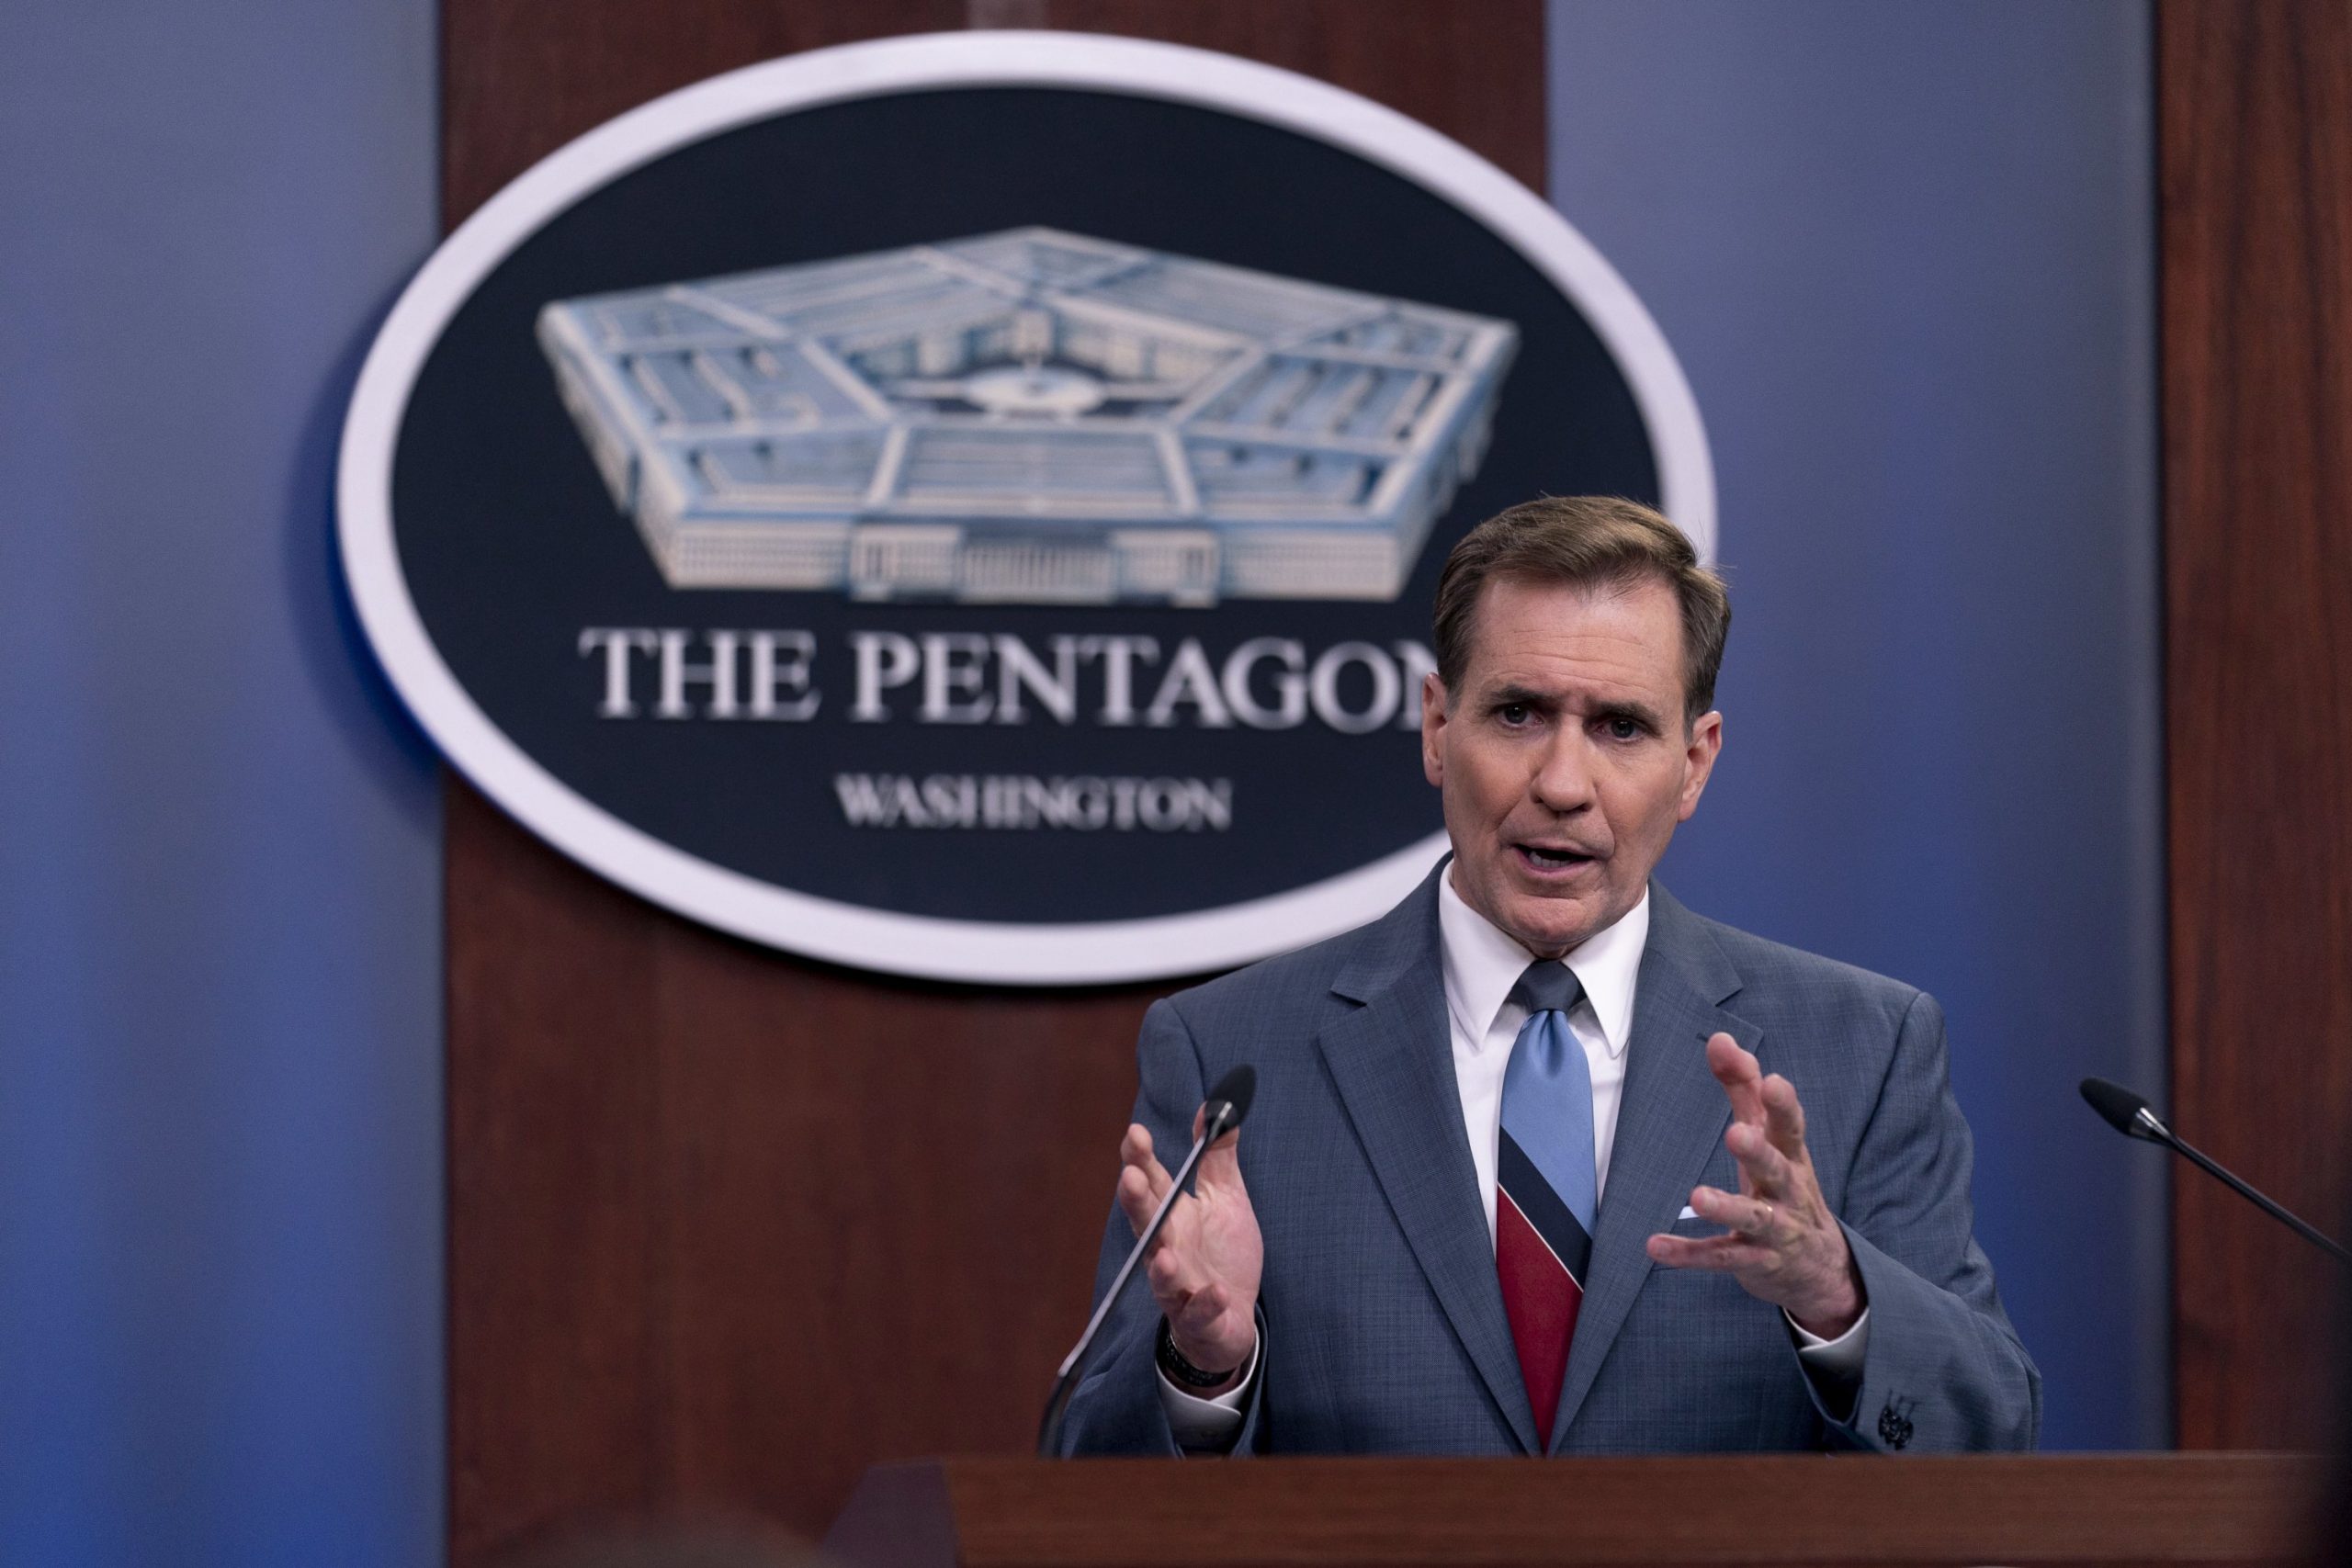 Pentagon: HH the Amir's Visit to US Strengthens Strategic Relations